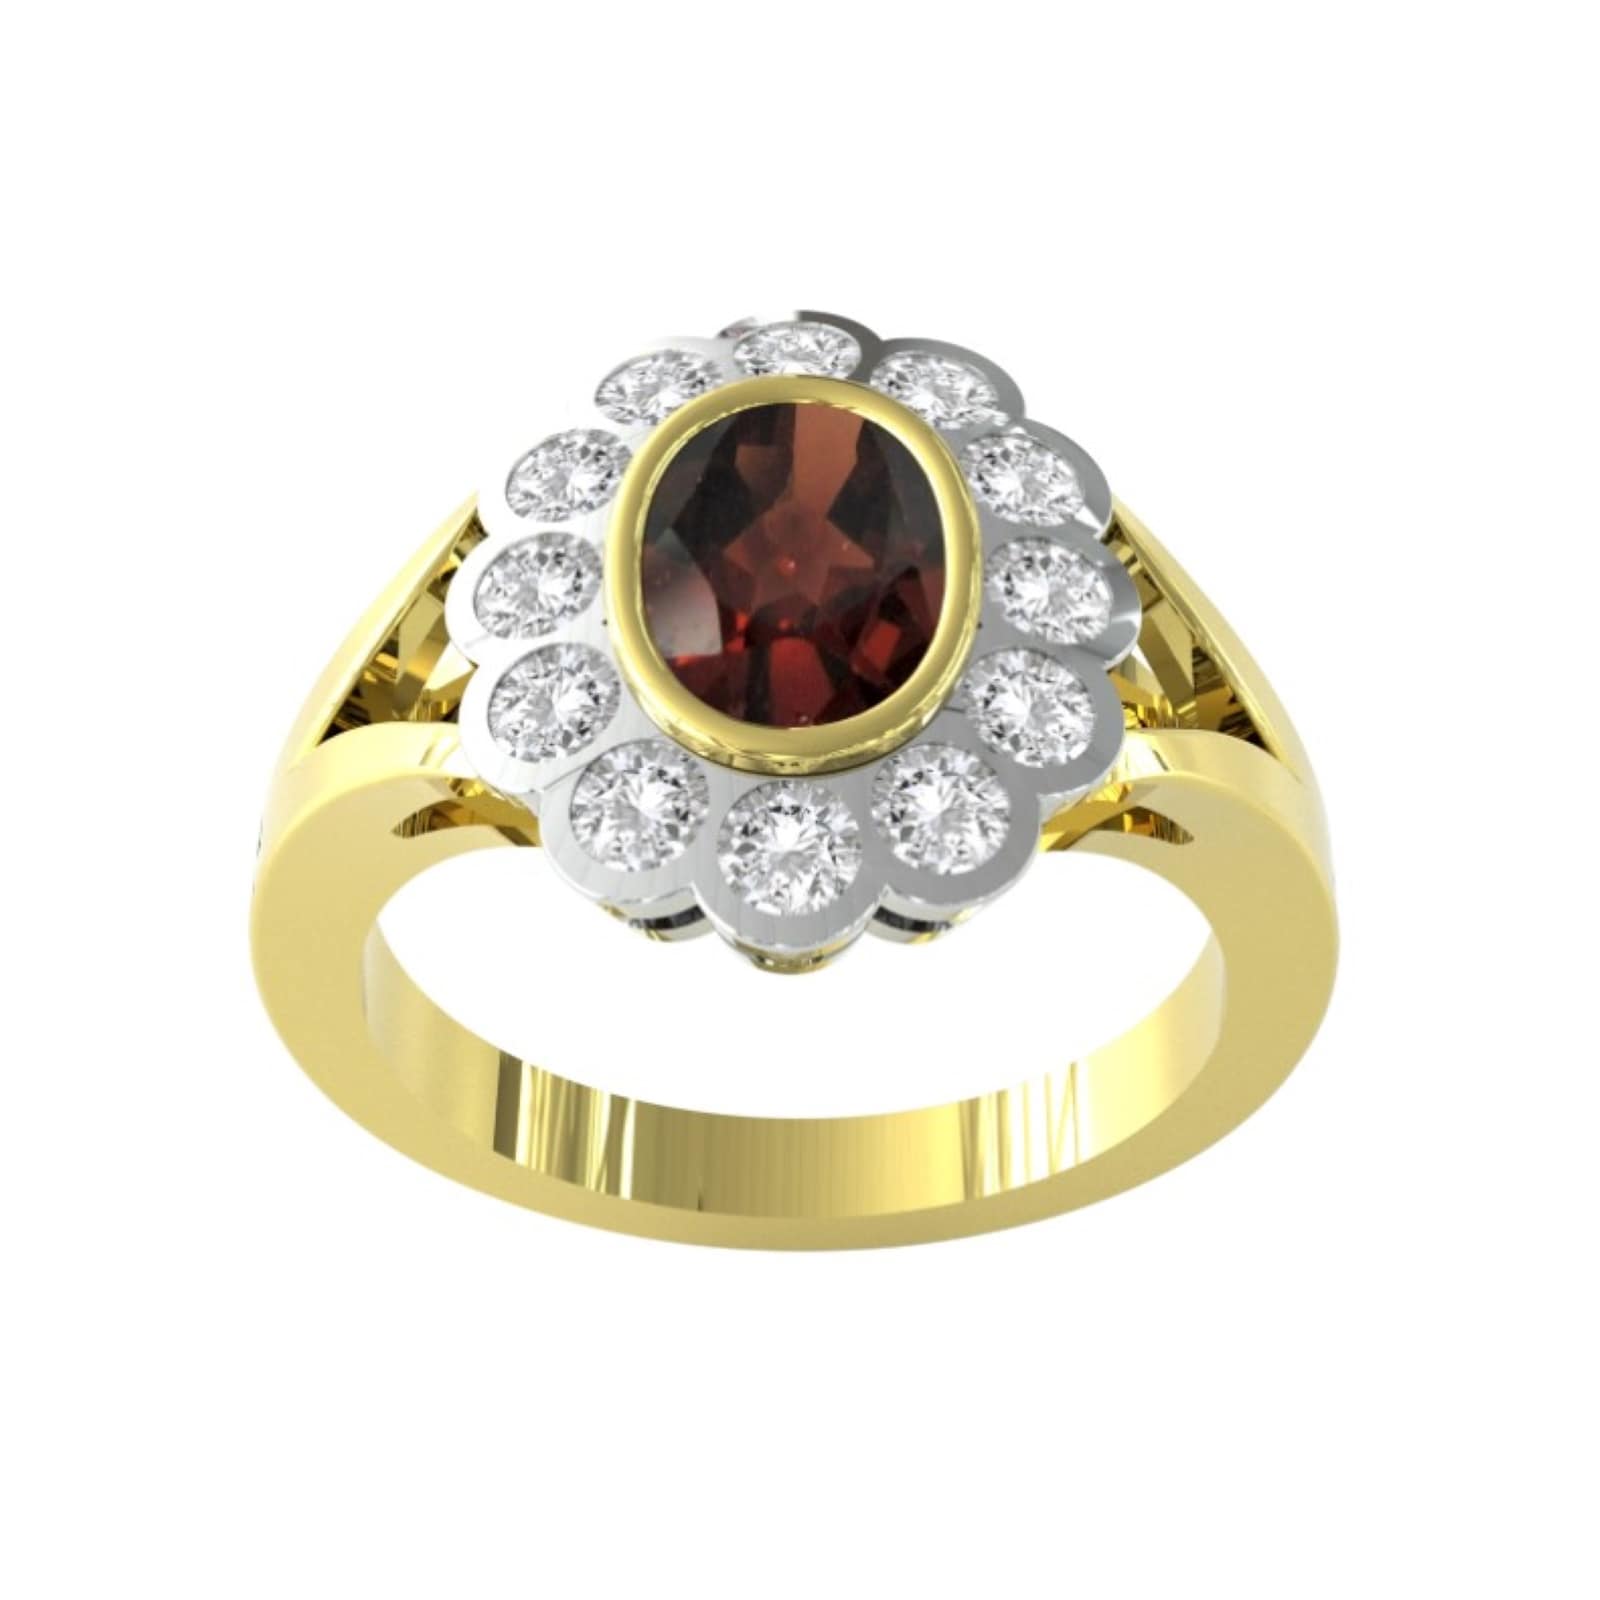 9ct Yellow and White Gold Garnet and Diamond Cluster Ring. - Ring Size D.5